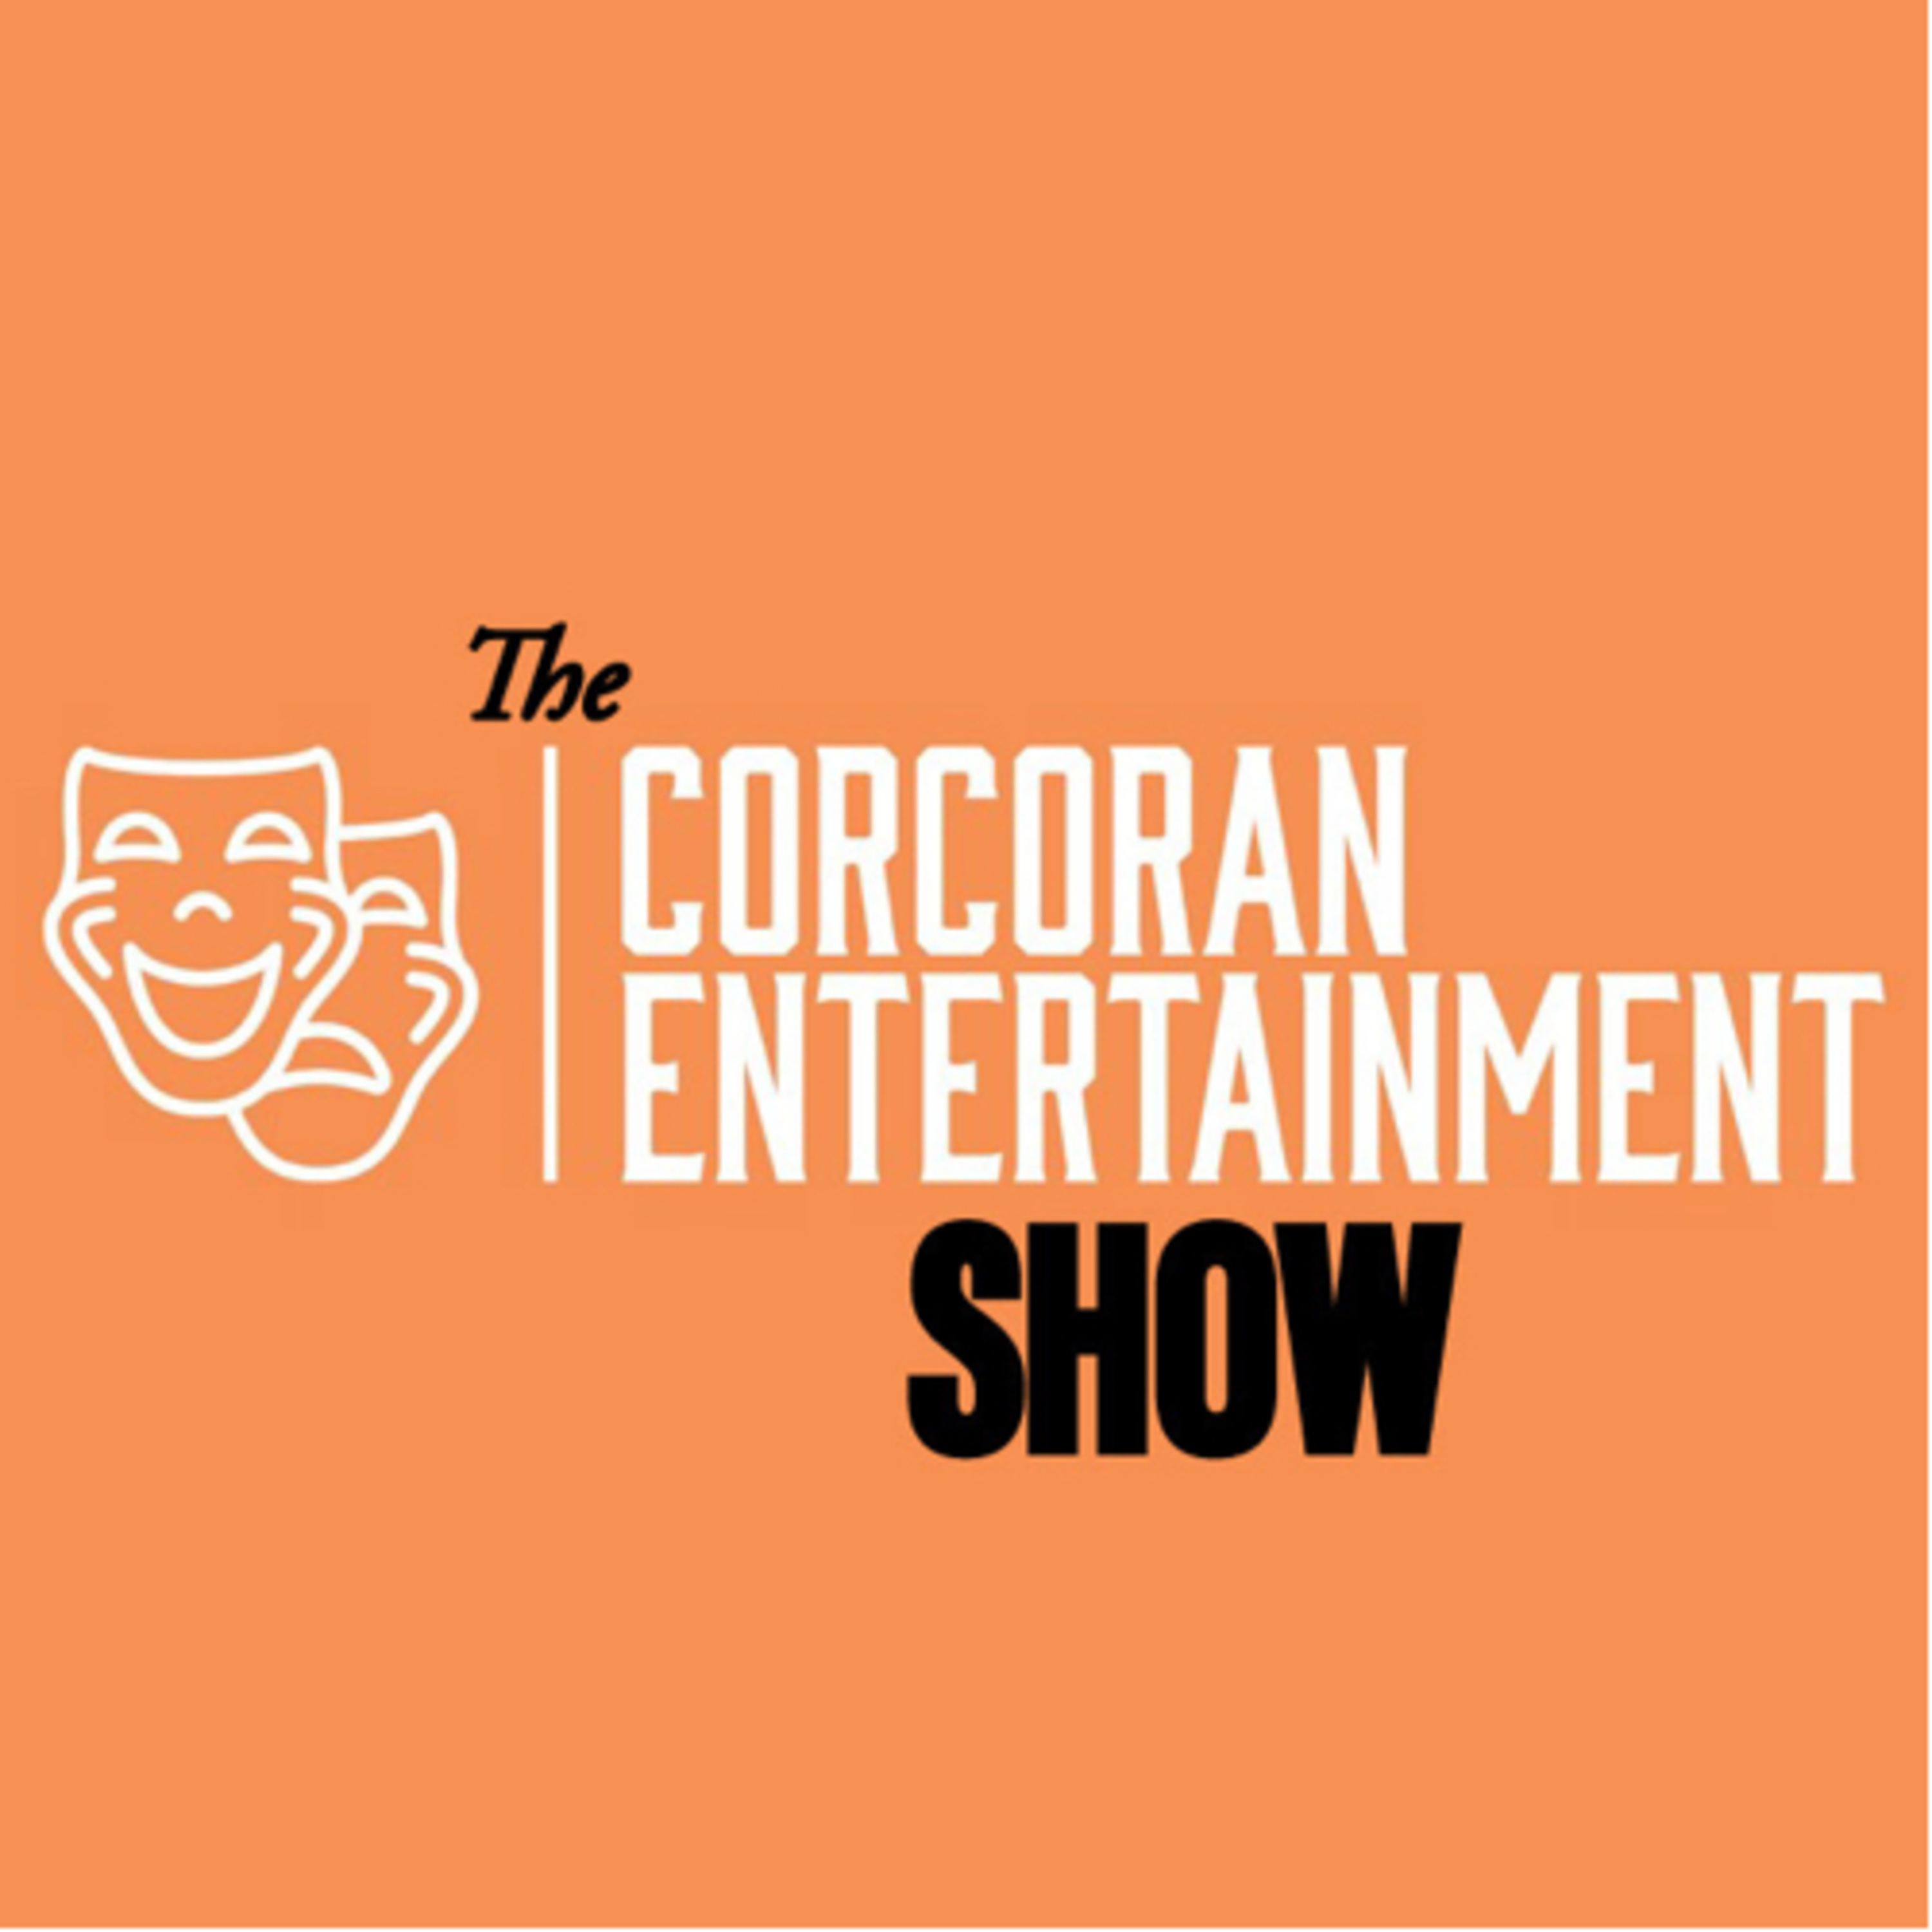 The Corcoran Entertainment Show